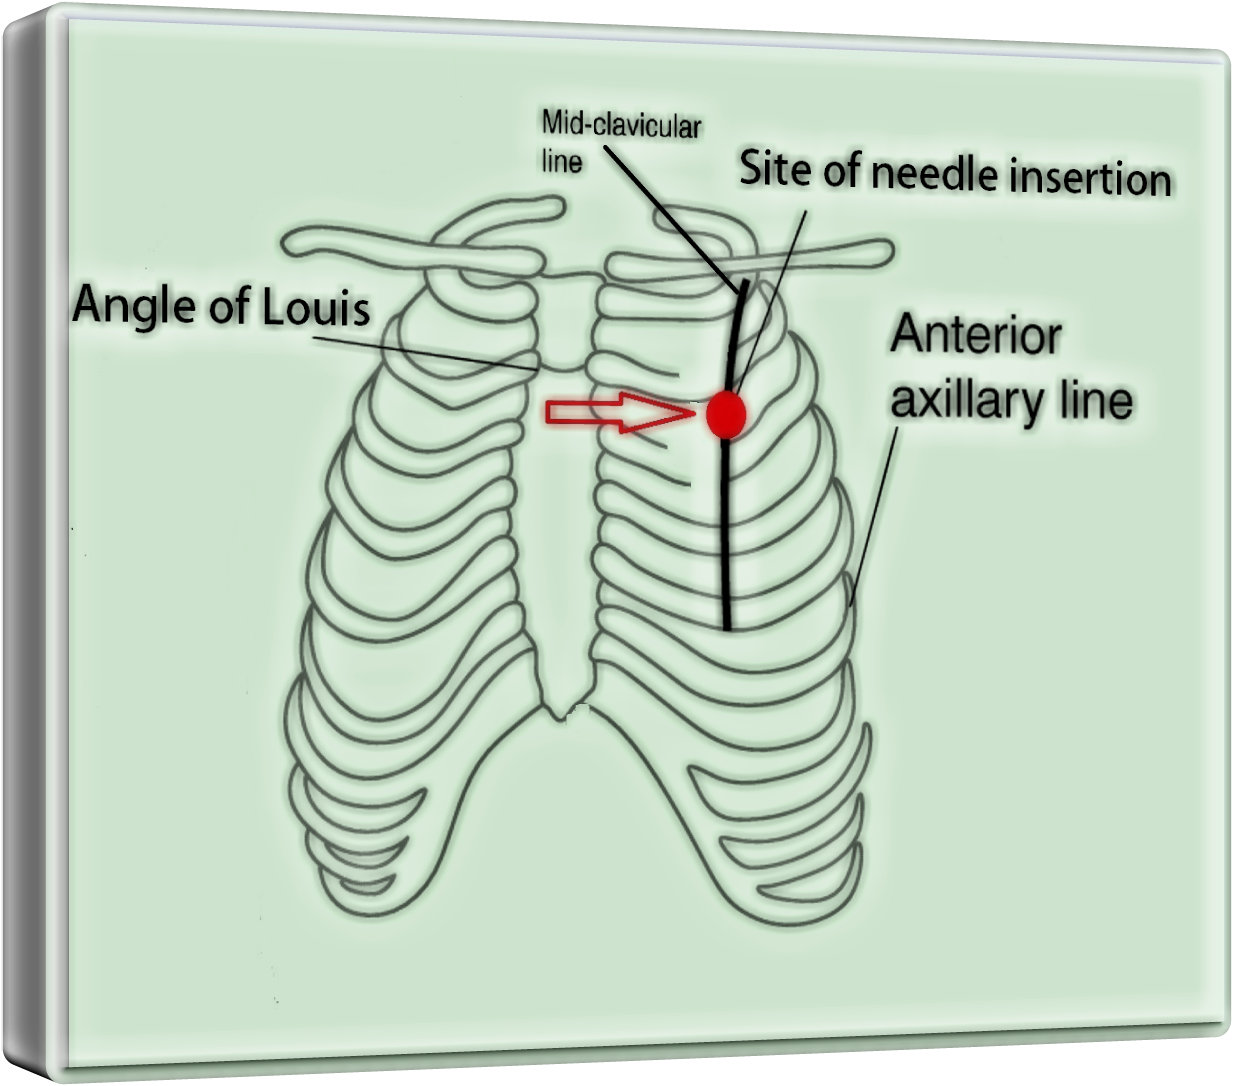 File:Site of needle insertion - 11.jpg